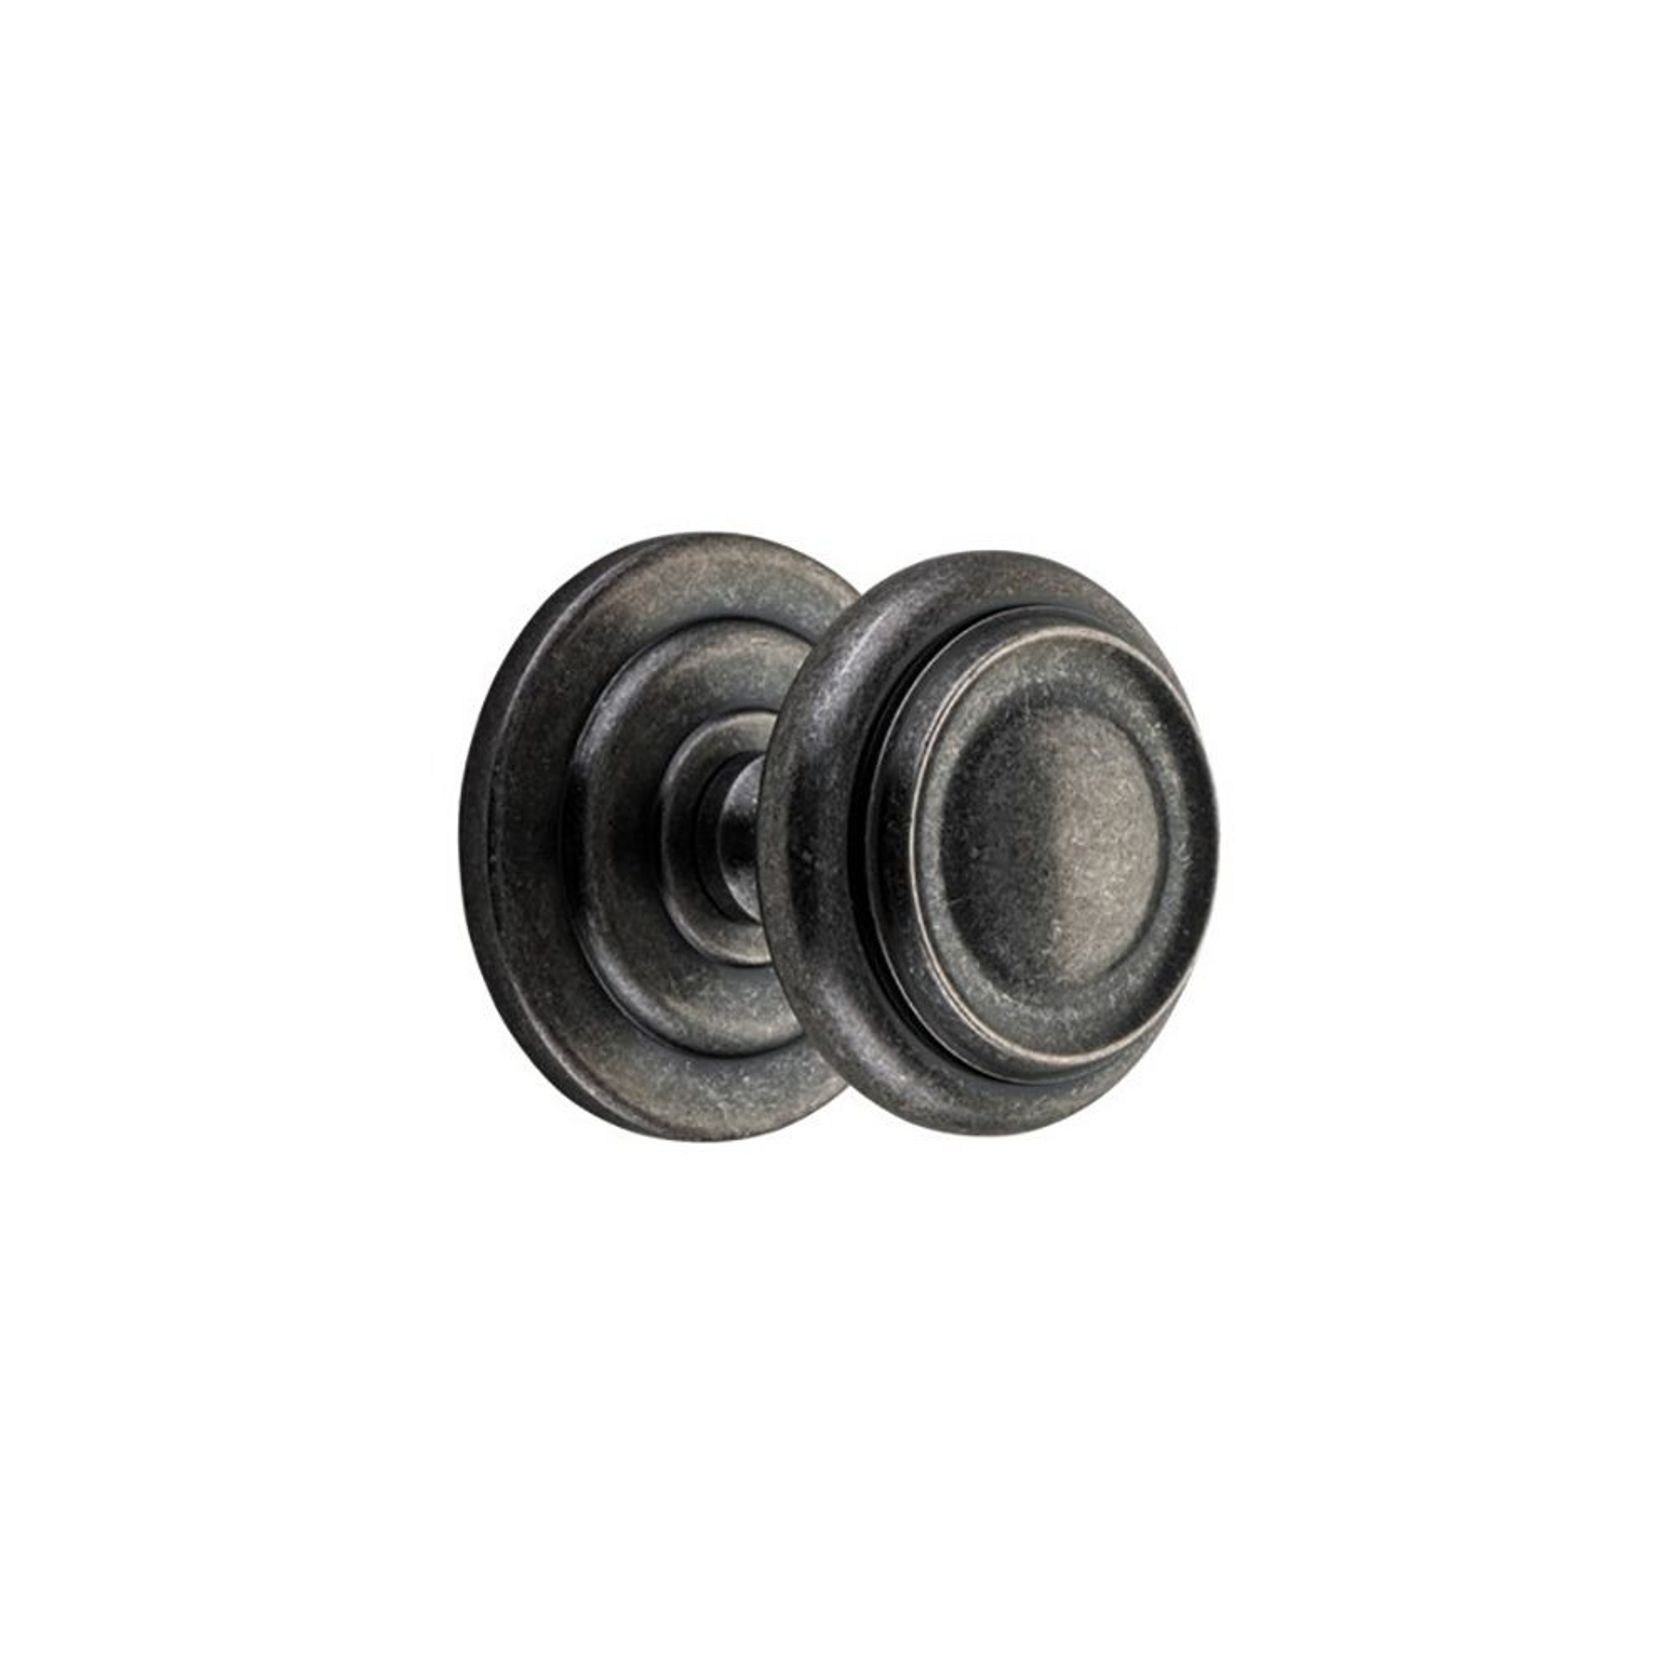 Iver Sarlat Centre Door Knob Distressed Nickel 107mm x 100mm 9407 - Customise to your need gallery detail image